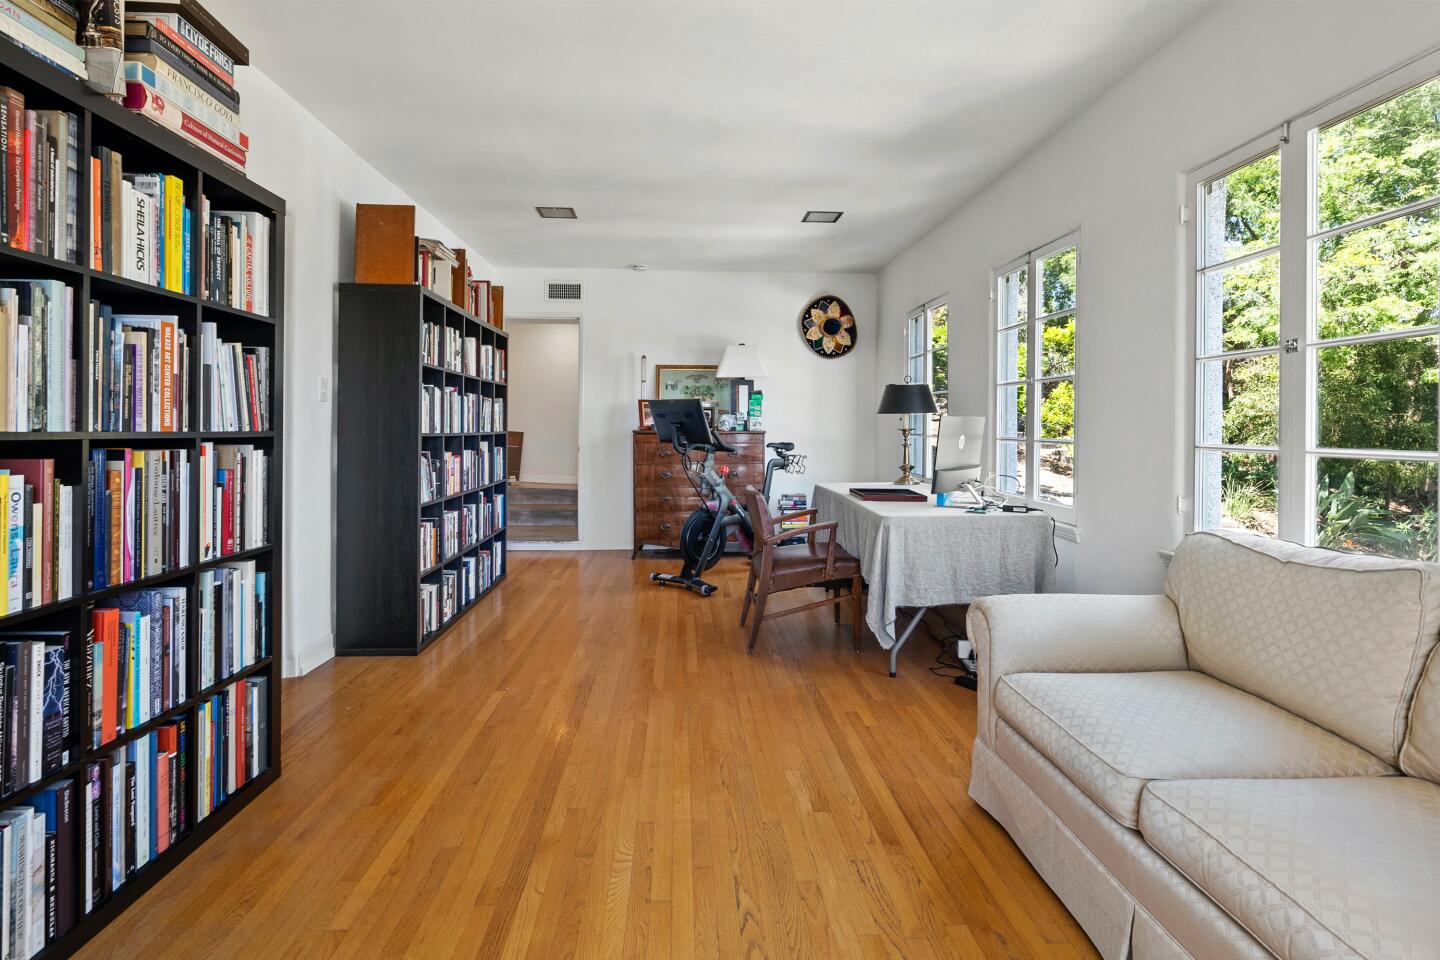 The office with hardwood floor, furniture and book-filled bookcases and windows.